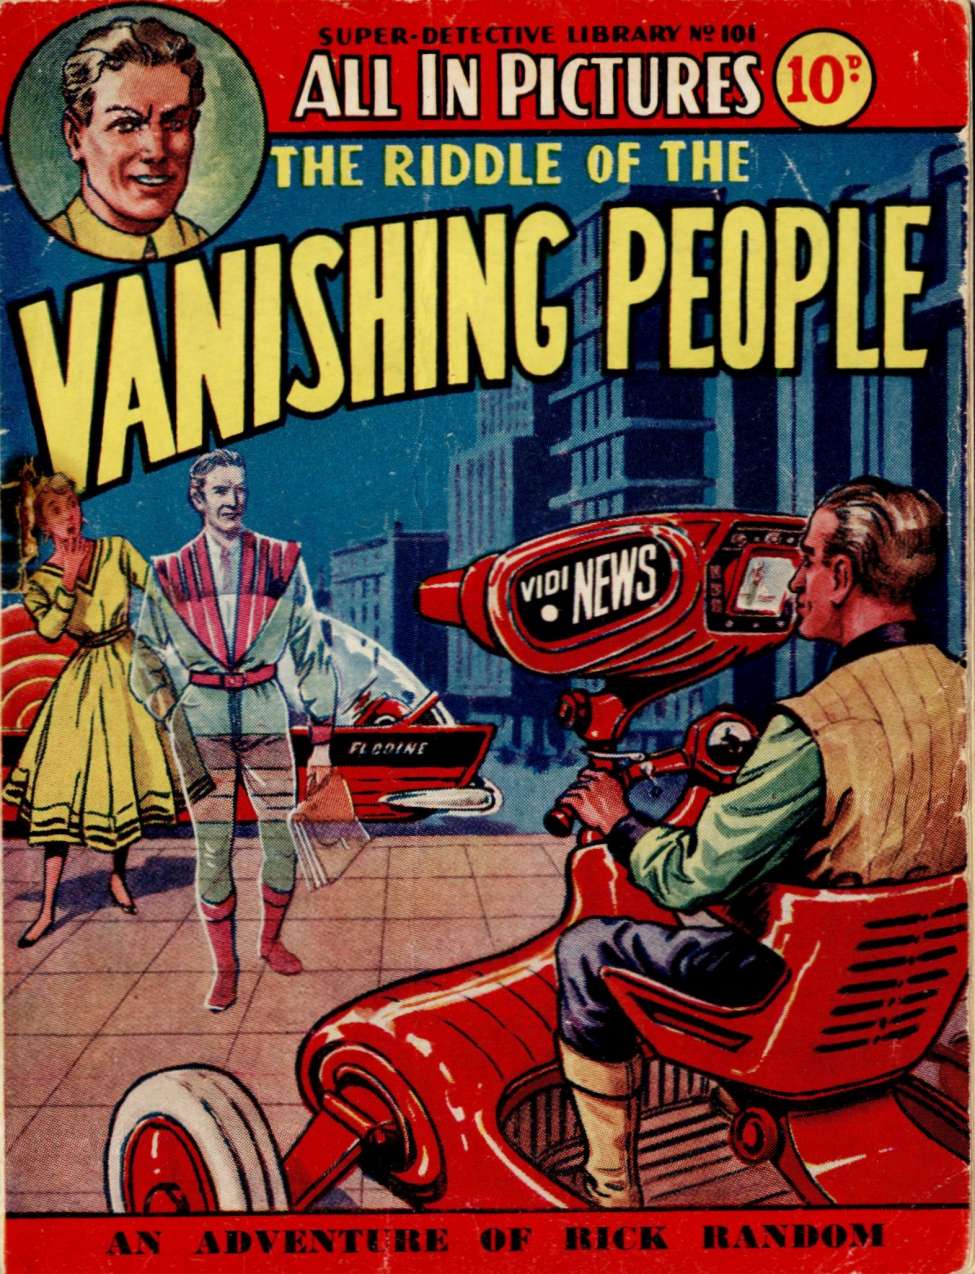 Book Cover For Super Detective Library 101 - The Riddle of the Vanishing People